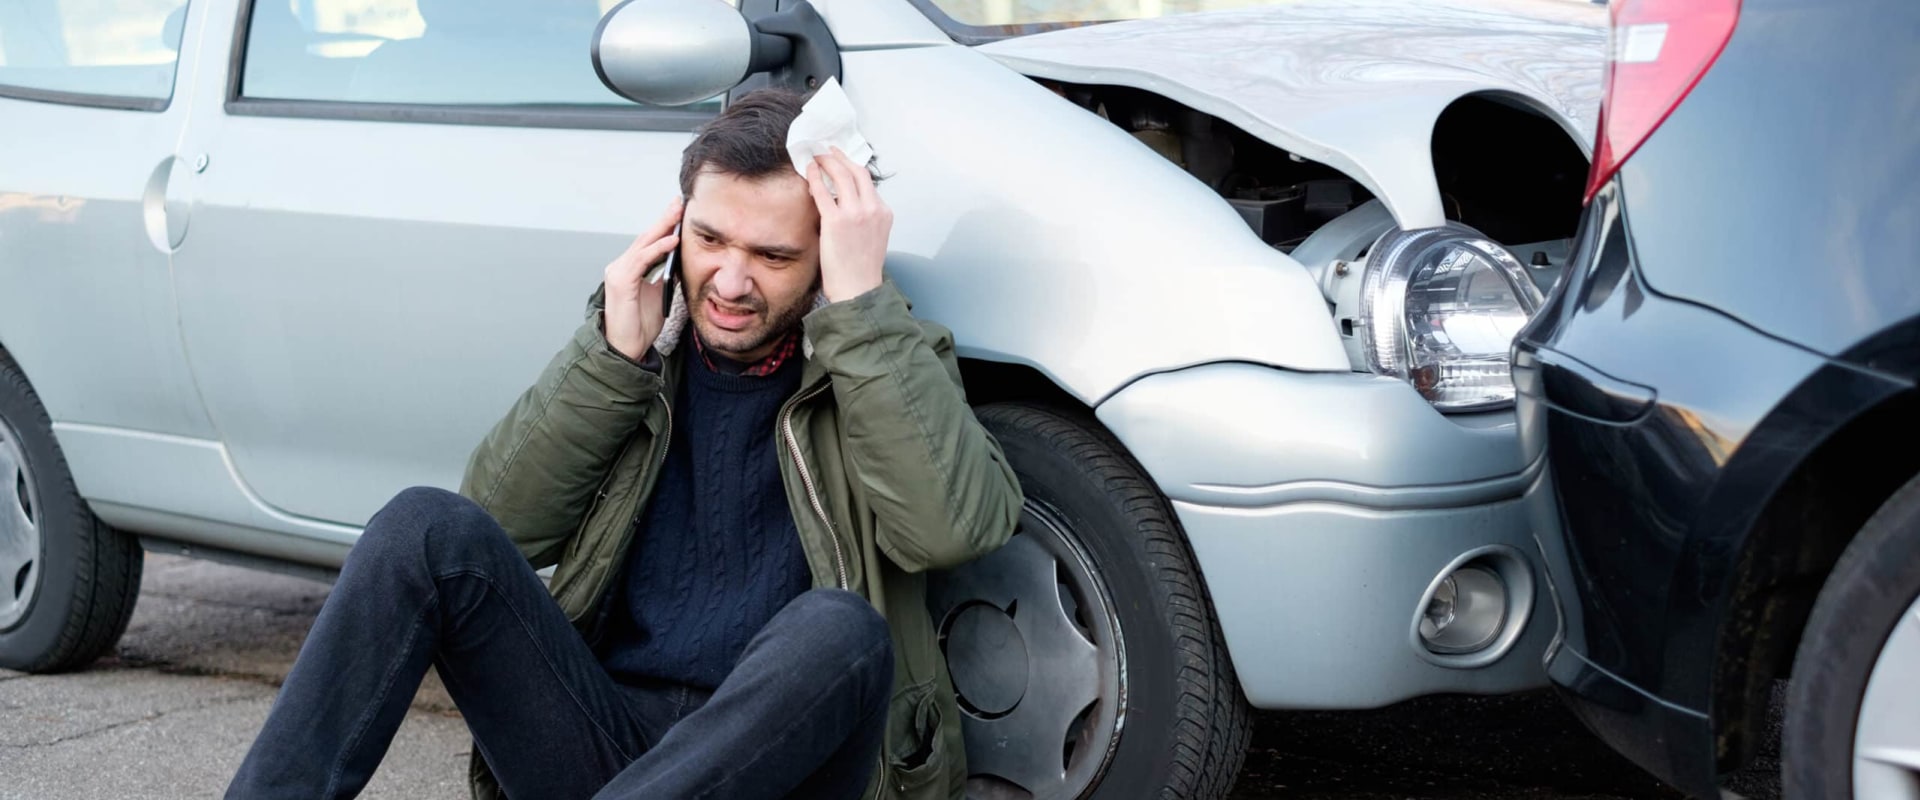 What to Do if You Experience Pain or Discomfort After an Emergency Auto Accident Injury Chiropractic Treatment